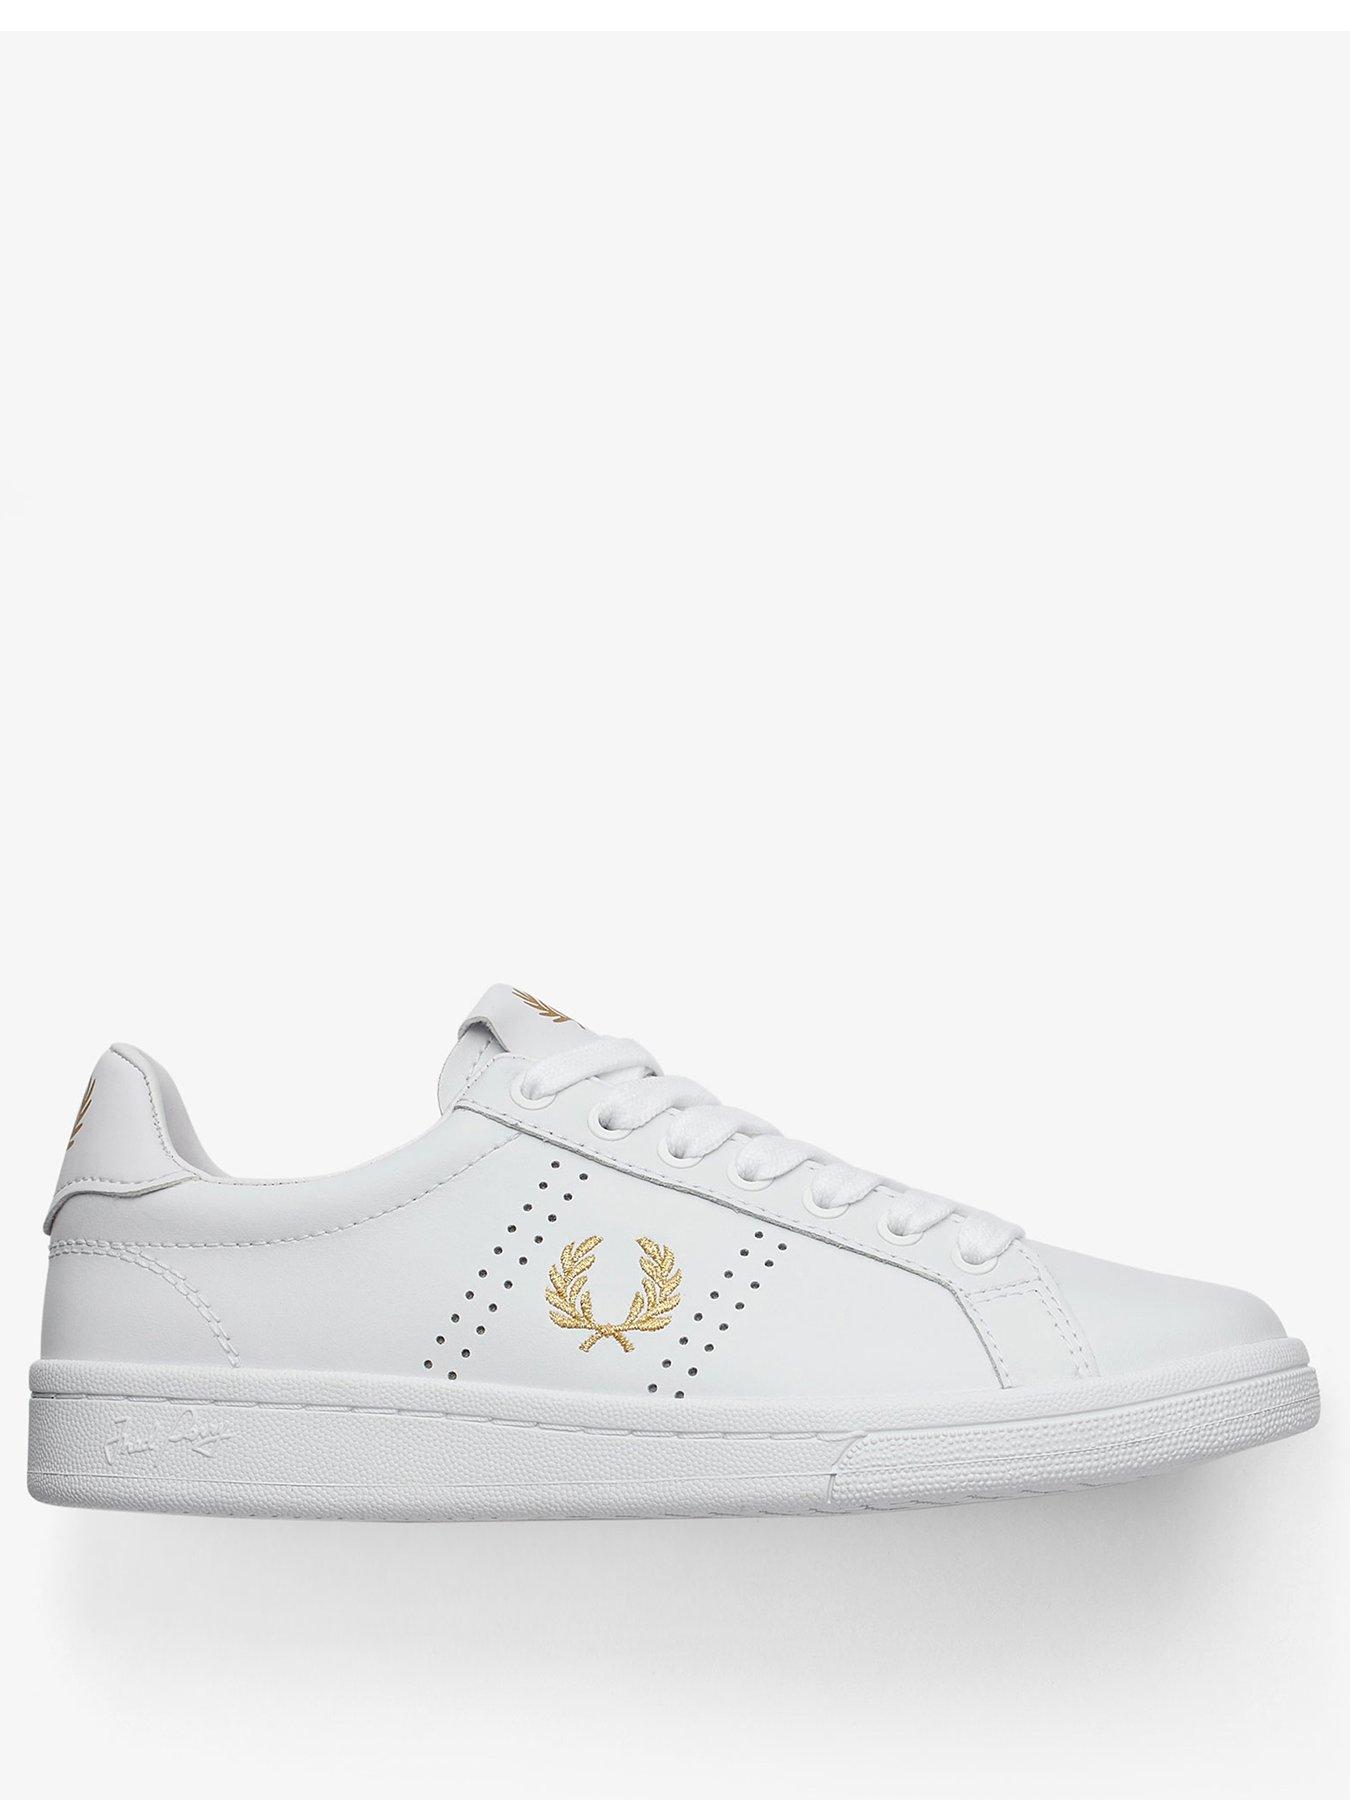 fred perry ladies shoes